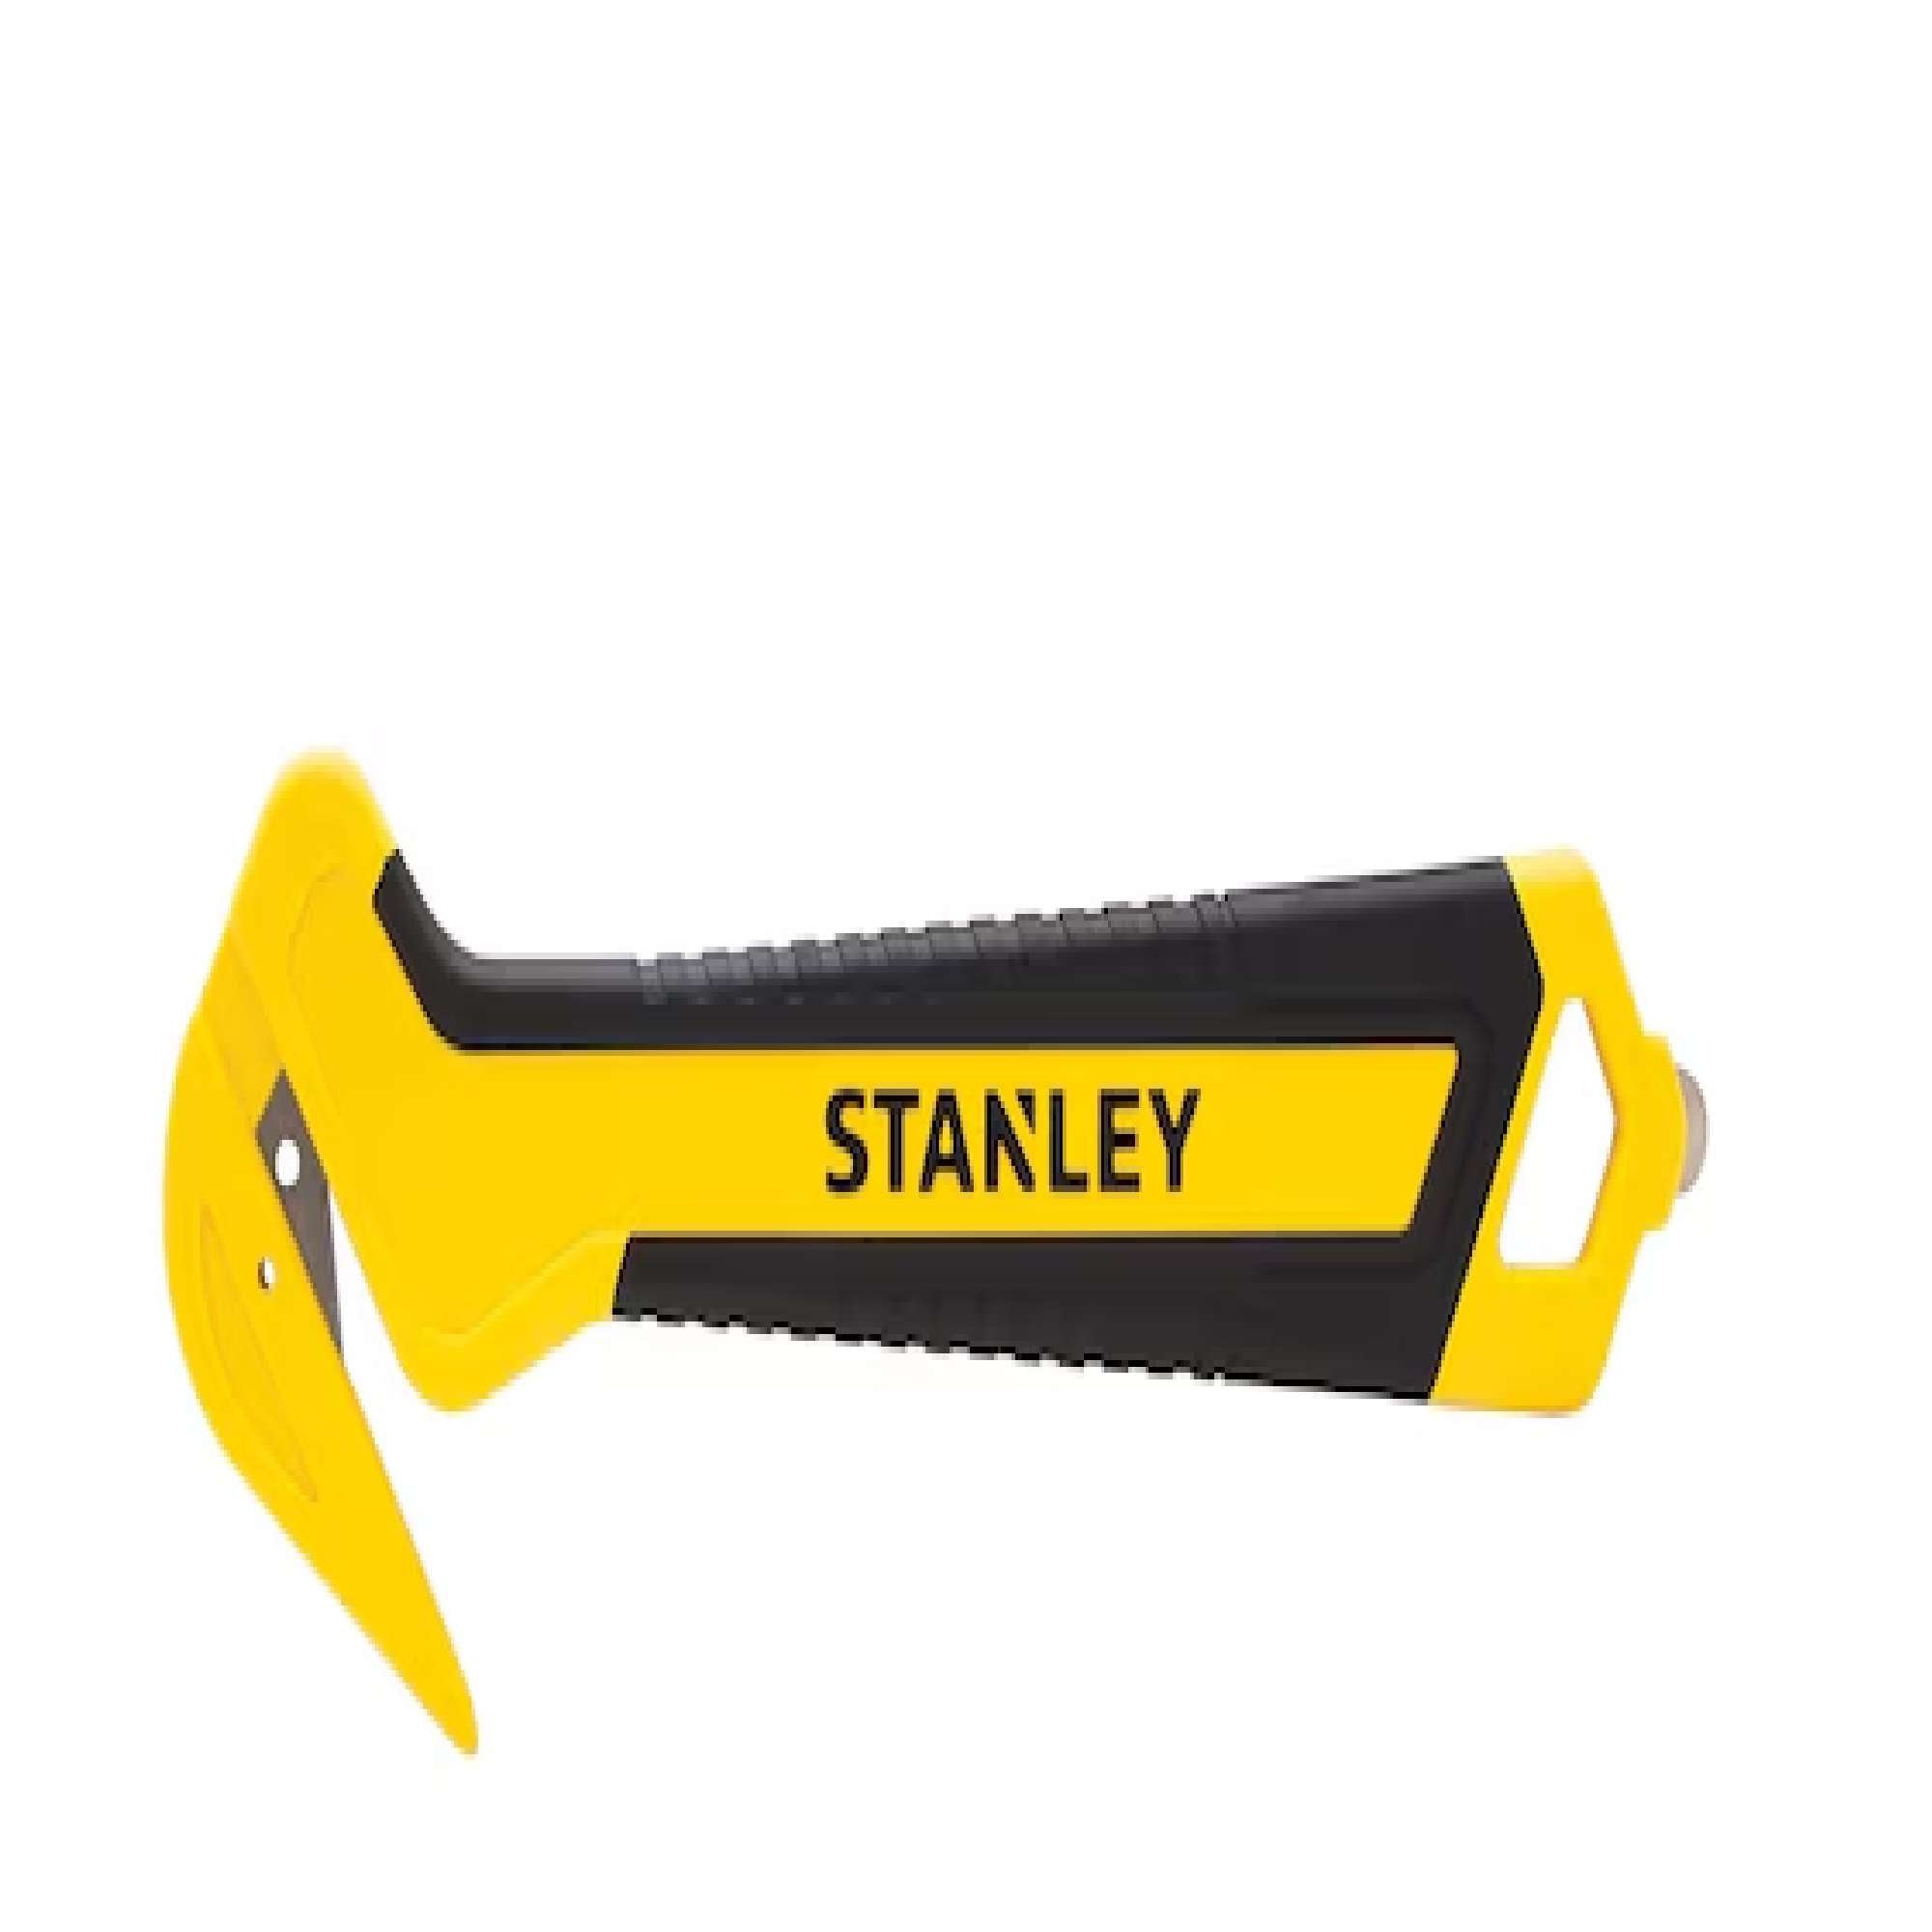 Bi-material safety knife with concealed blade - Stanley STHT10356-0